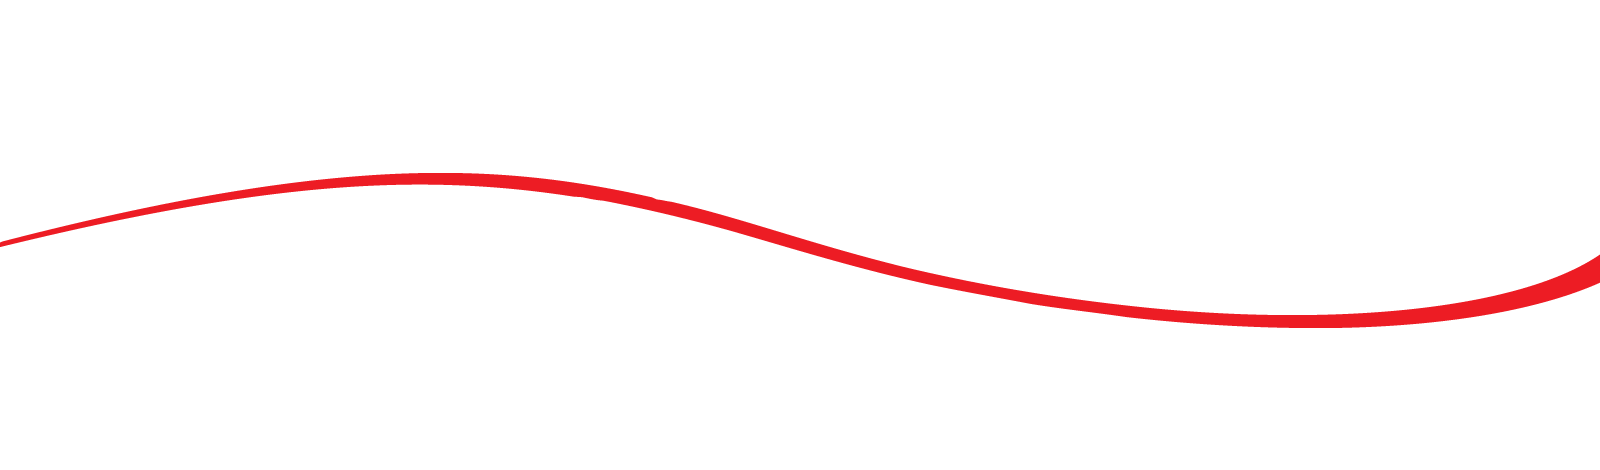 Red Line-1.png